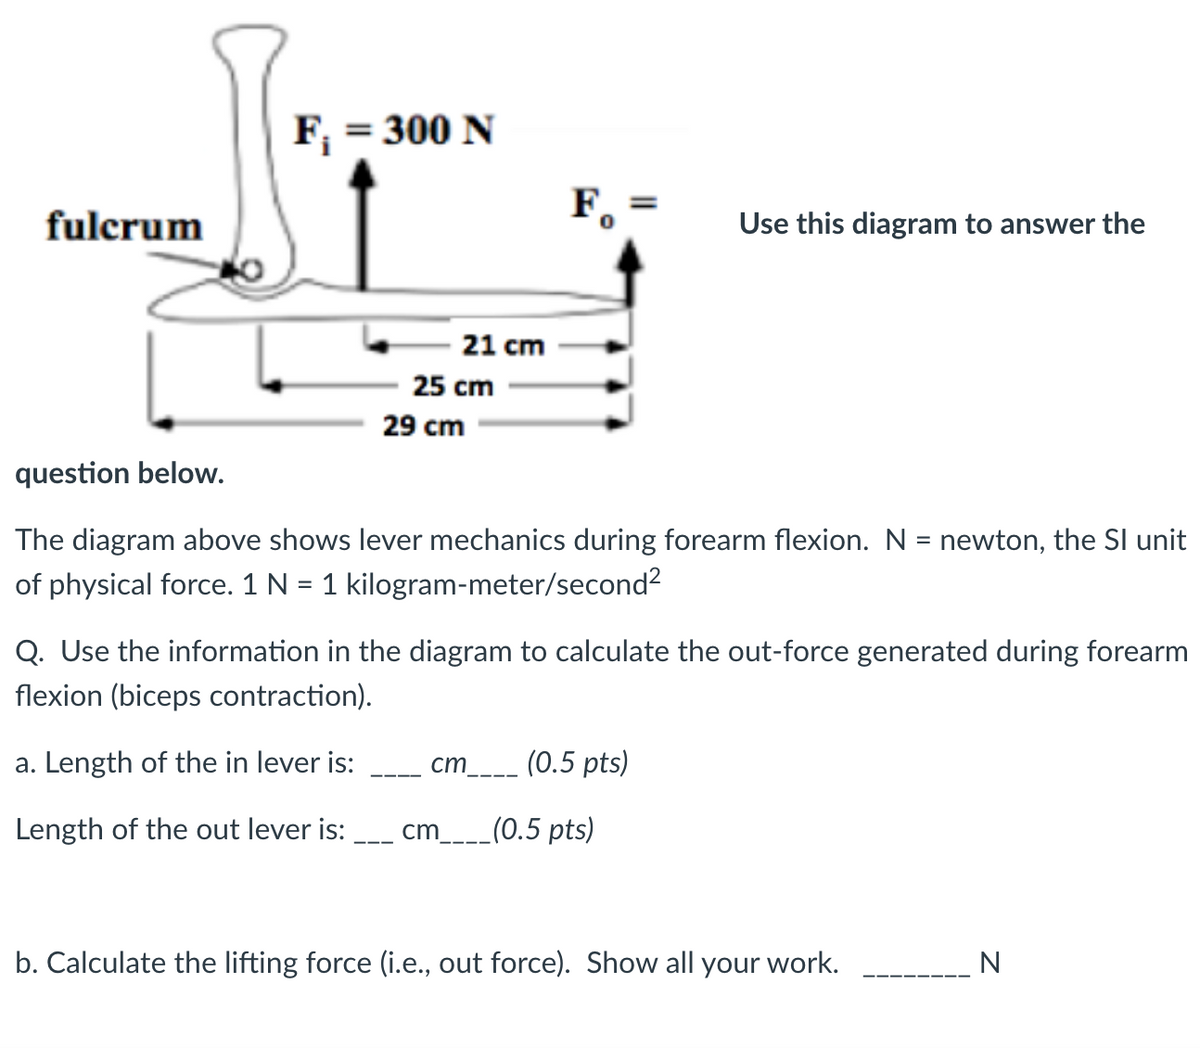 fulcrum
F₁ = 300 N
21 cm
25 cm
29 cm
F
Use this diagram to answer the
question below.
The diagram above shows lever mechanics during forearm flexion. N = newton, the SI unit
of physical force. 1 N = 1 kilogram-meter/second²
Q. Use the information in the diagram to calculate the out-force generated during forearm
flexion (biceps contraction).
a. Length of the in lever is:
cm
(0.5 pts)
Length of the out lever is:
cm____(0.5 pts)
b. Calculate the lifting force (i.e., out force). Show all your work.
N